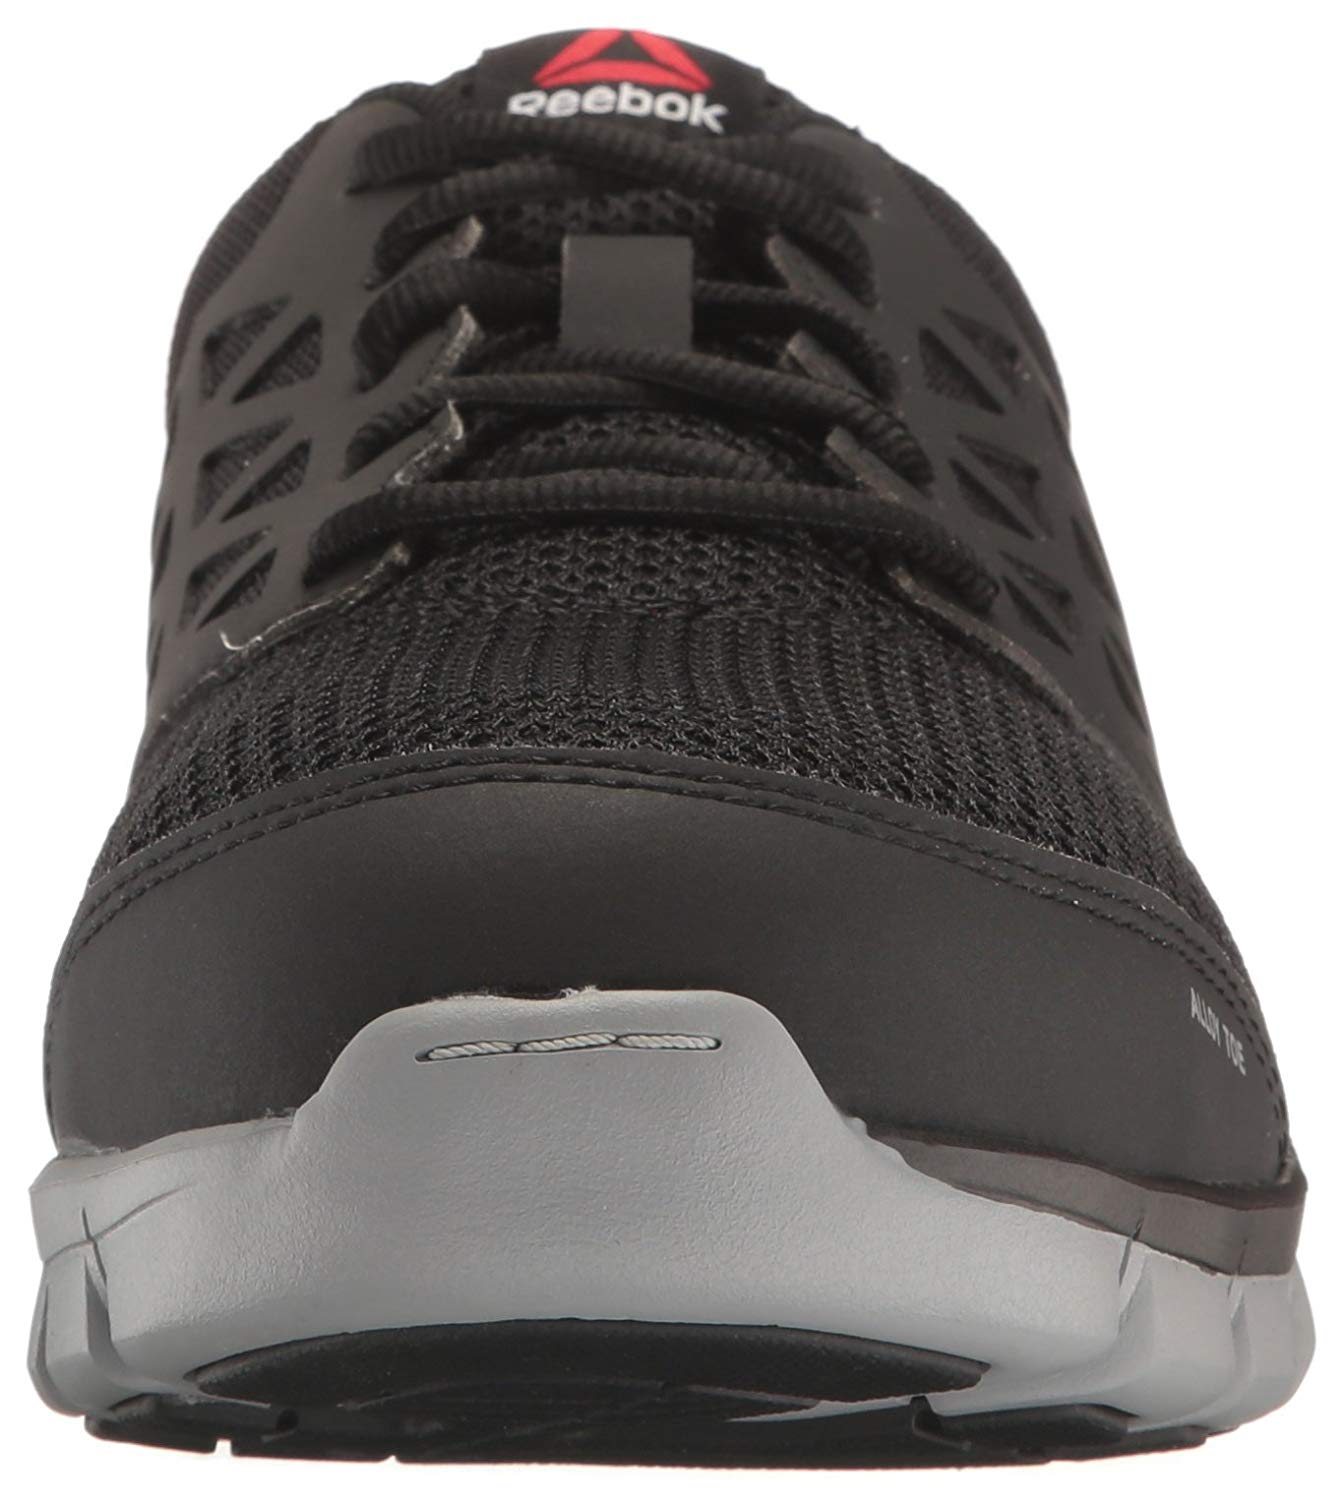 reebok work men's sublite cushion work industrial and construction shoe